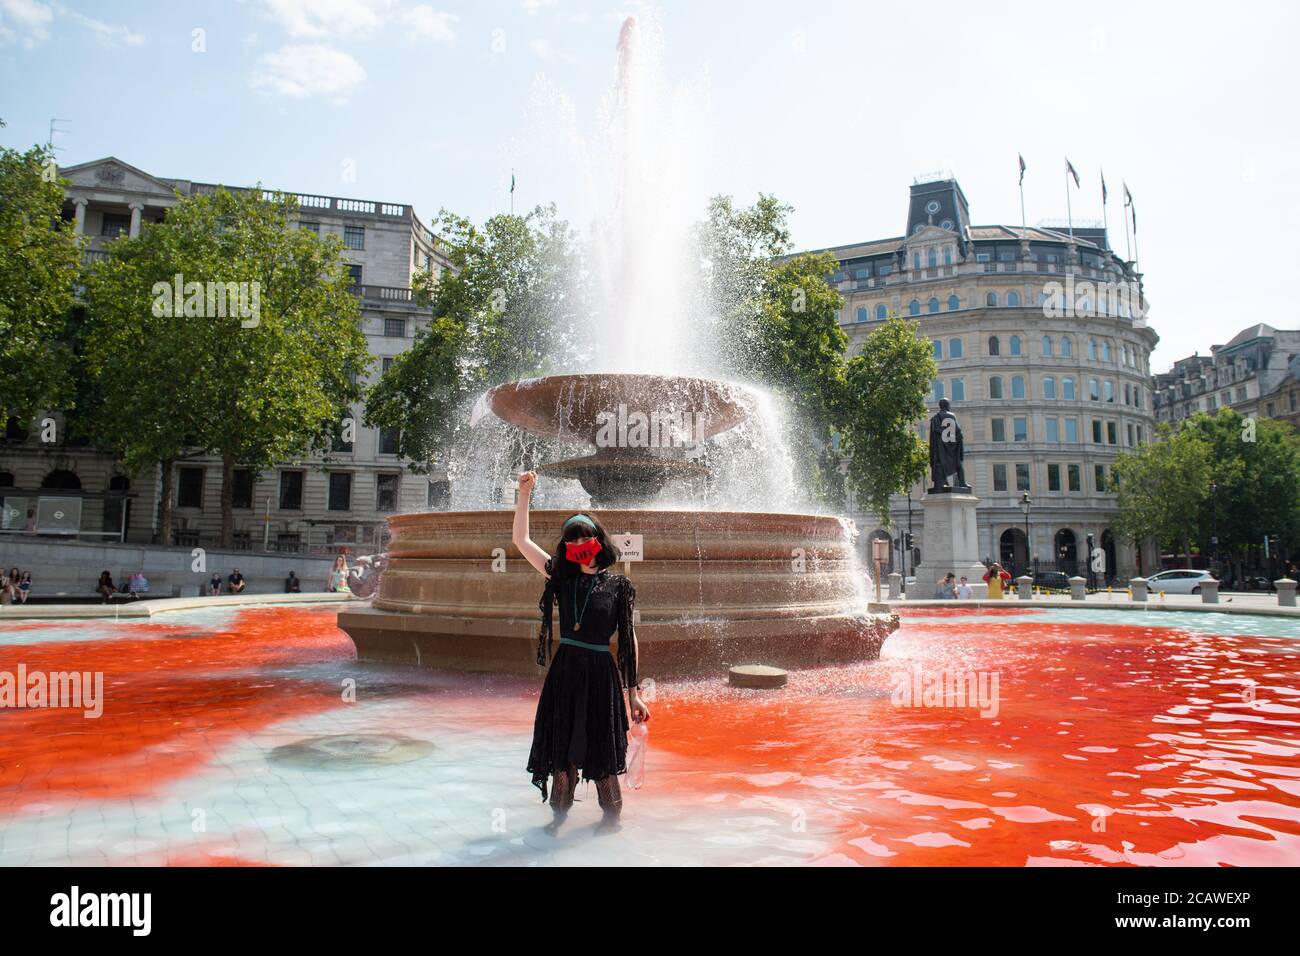 Extinction Rebellion activists dye fountains in Trafalgar Square, London, during a protest in solidarity with indigenous communities in Brazil who are dying from Covid-19. Stock Photo